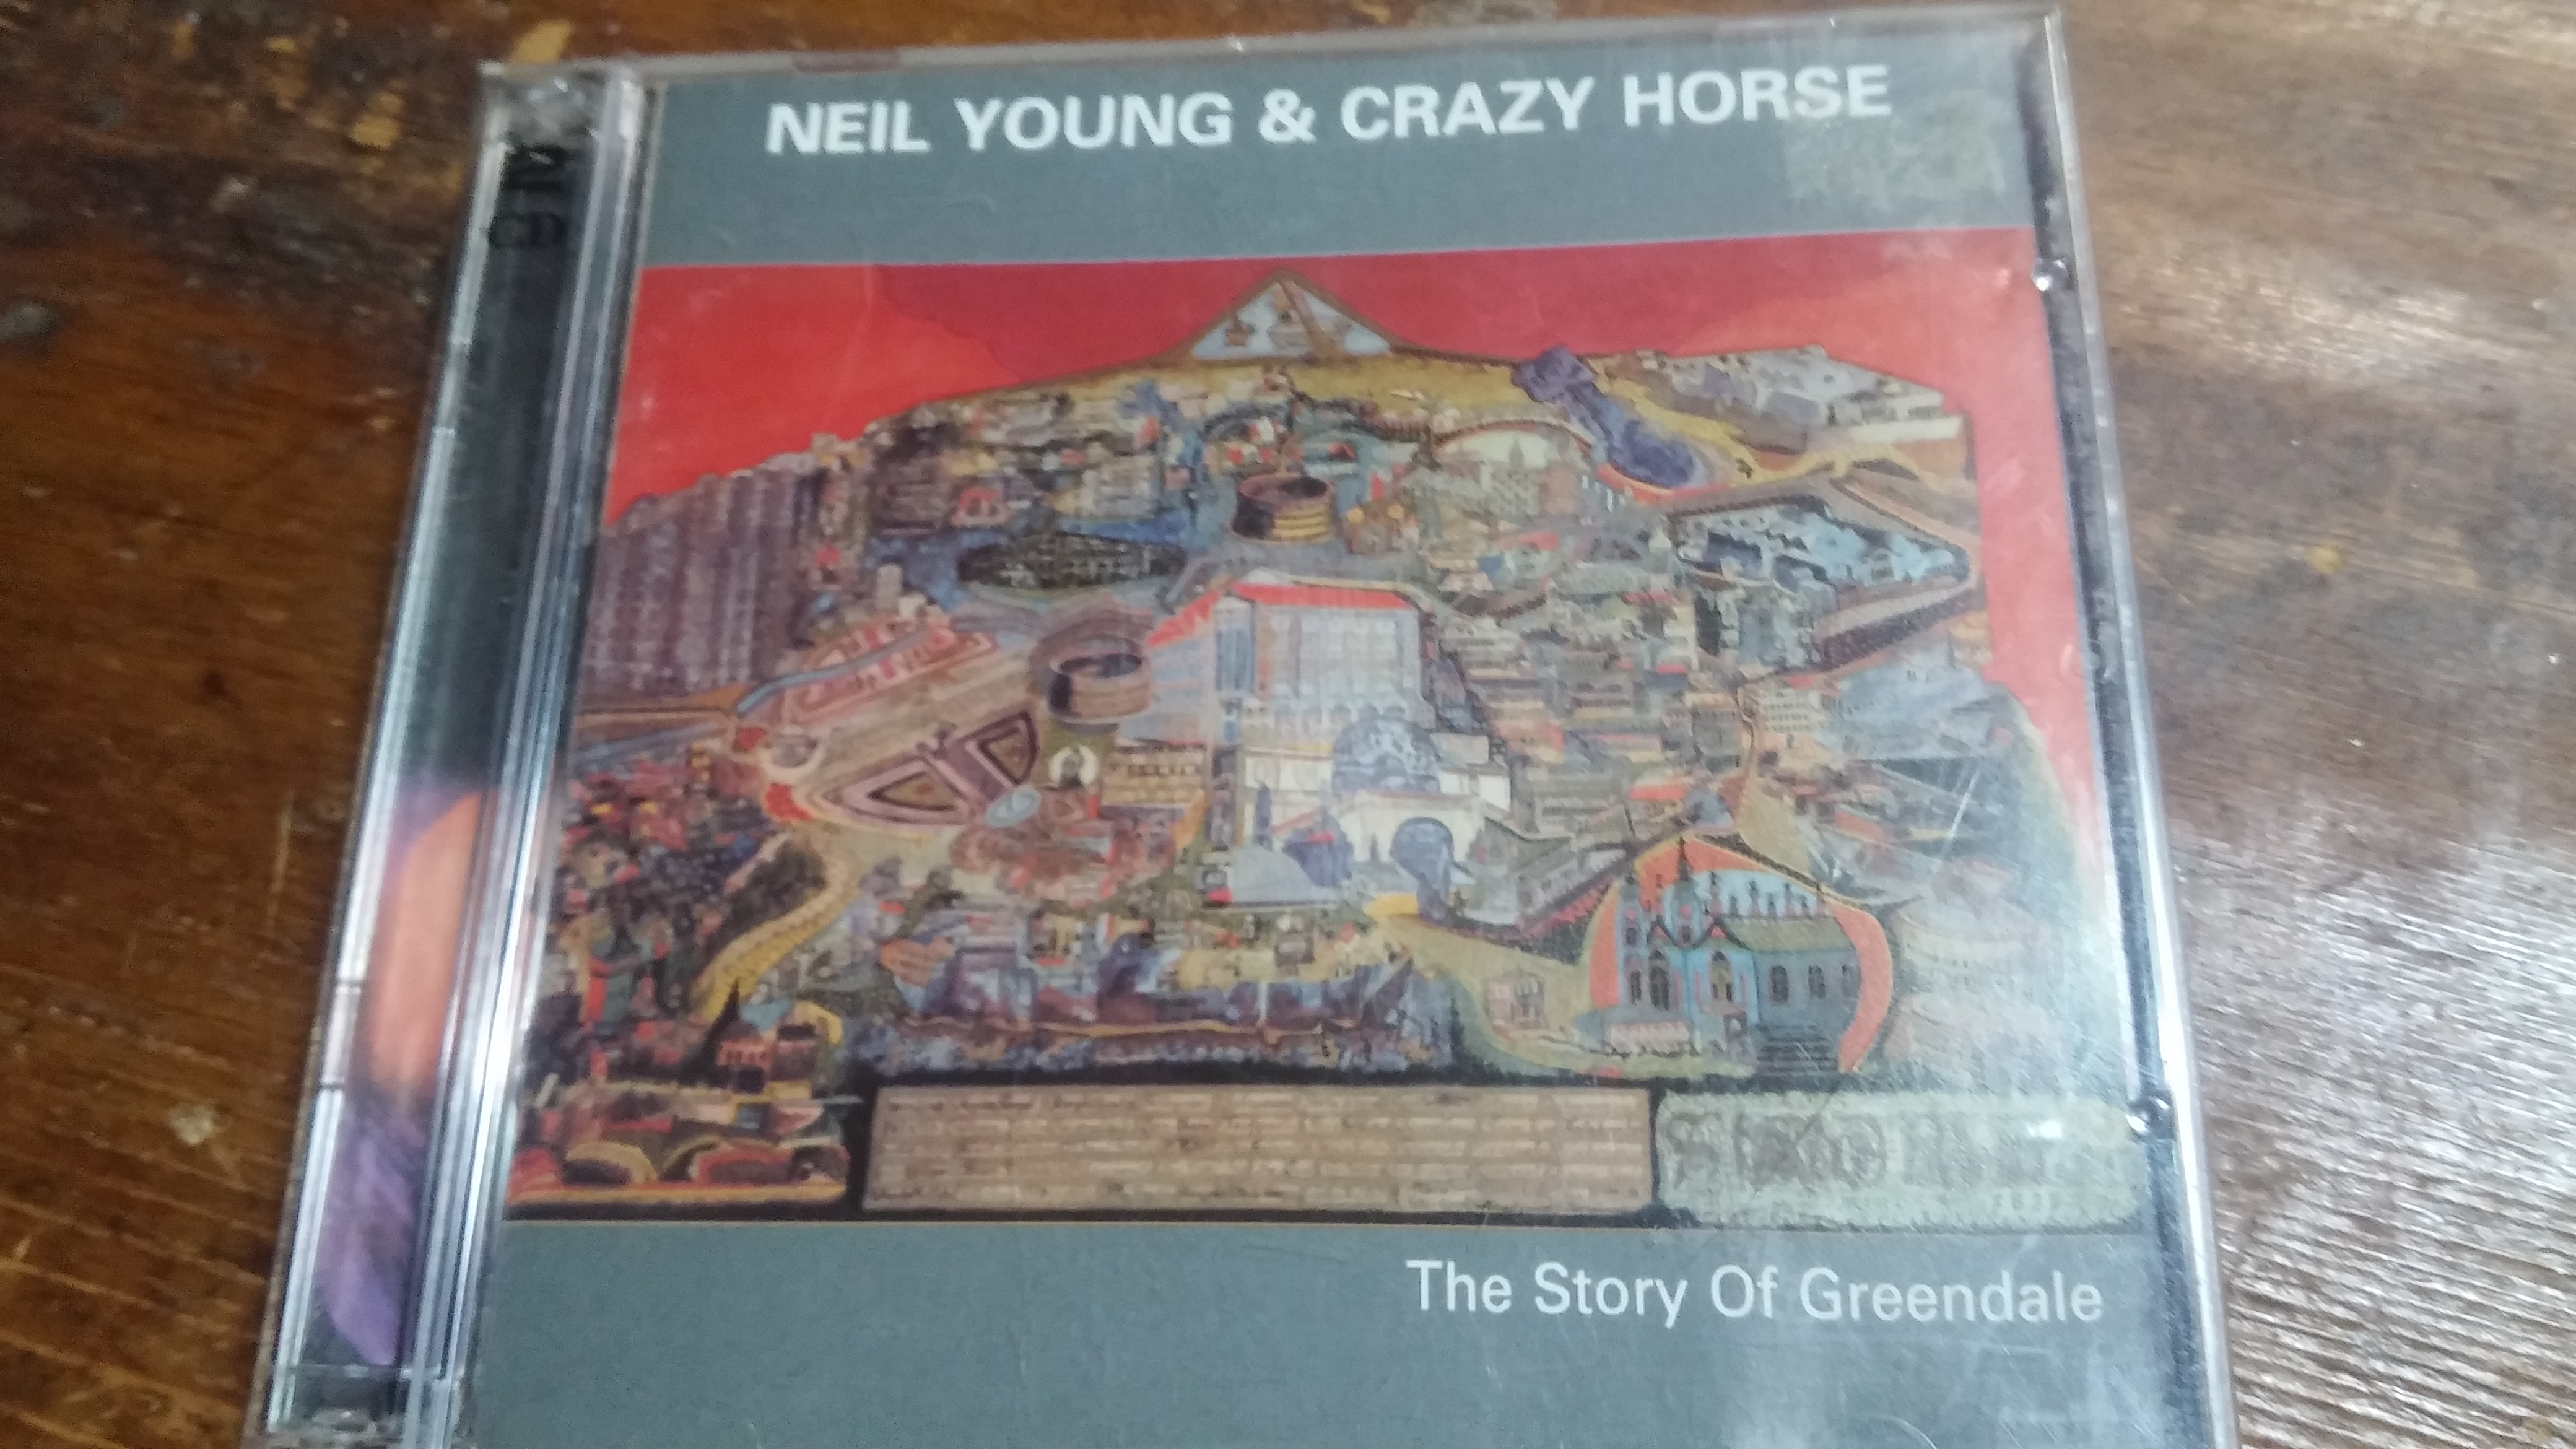 NEIL YOUNG & CAZY HORSE  - THE STORY OF GREENDALE